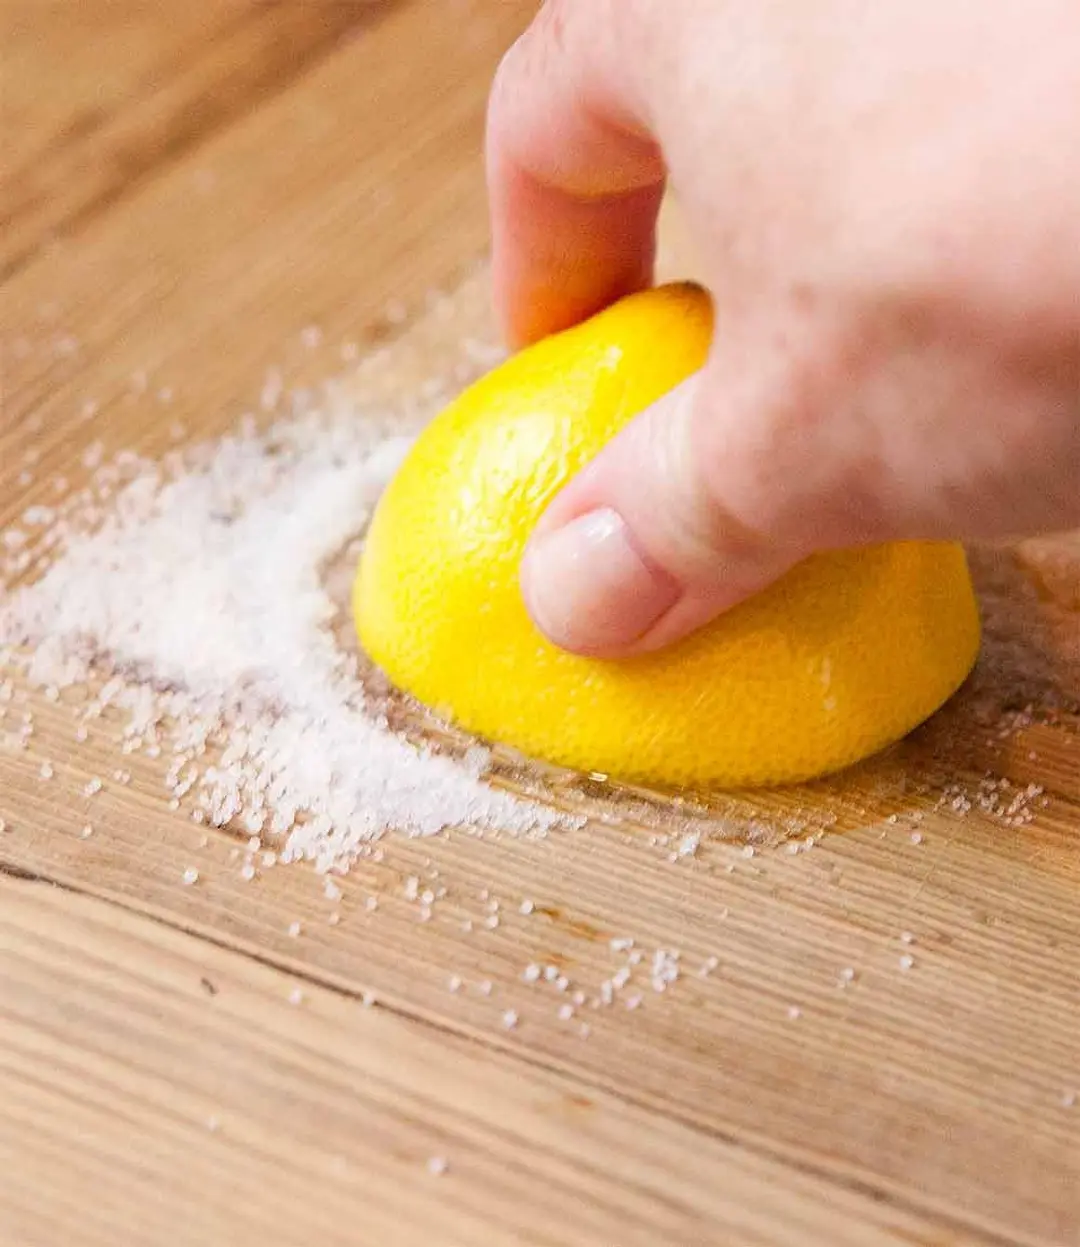 Lemon and Salt - How to Clean Wooden Cutting Boards